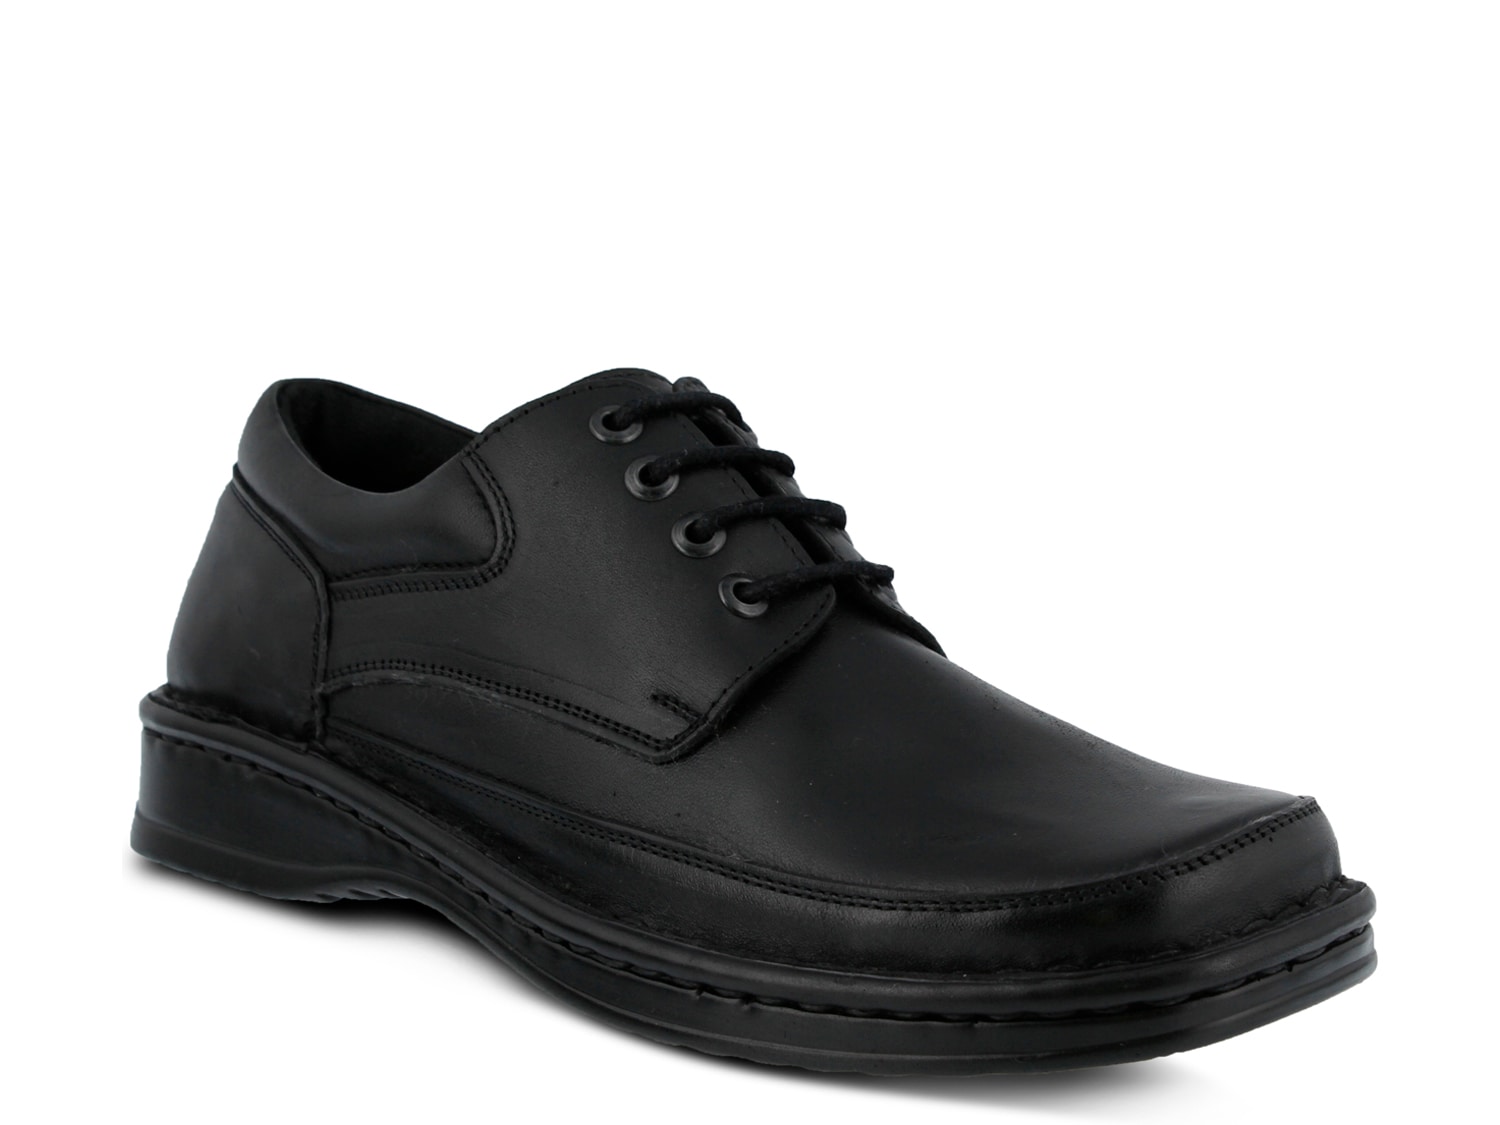 Spring Step Arthur Oxford - Free Shipping | DSW